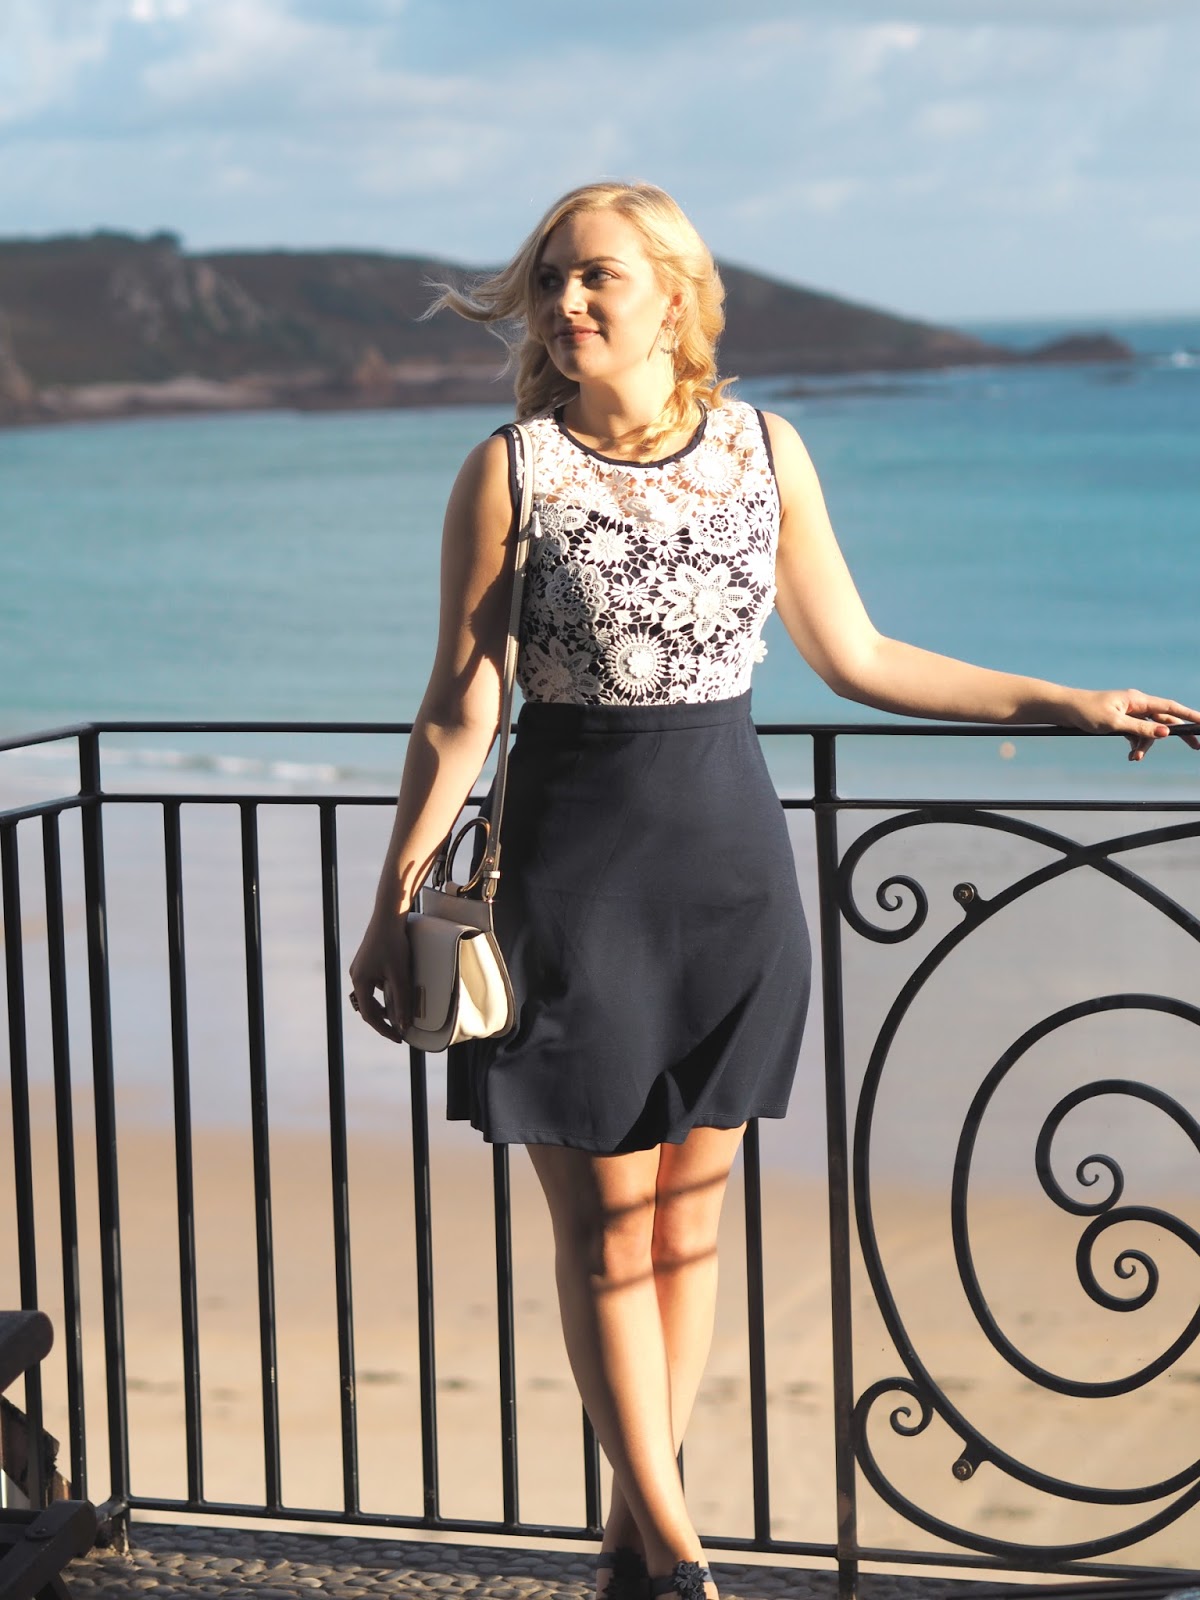 Dressed for Dinner at The Salty Dog, Jersey, Channel Islands, St Aubins Bay, The Salty Dog Restaurant, UK Blogger, Katie Kirk Loves, Fashion Blogger, Fashion Influencer, Style Blogger, Travel Blogger, UK Travel Blogger, Restaurant Review, Food Blogger